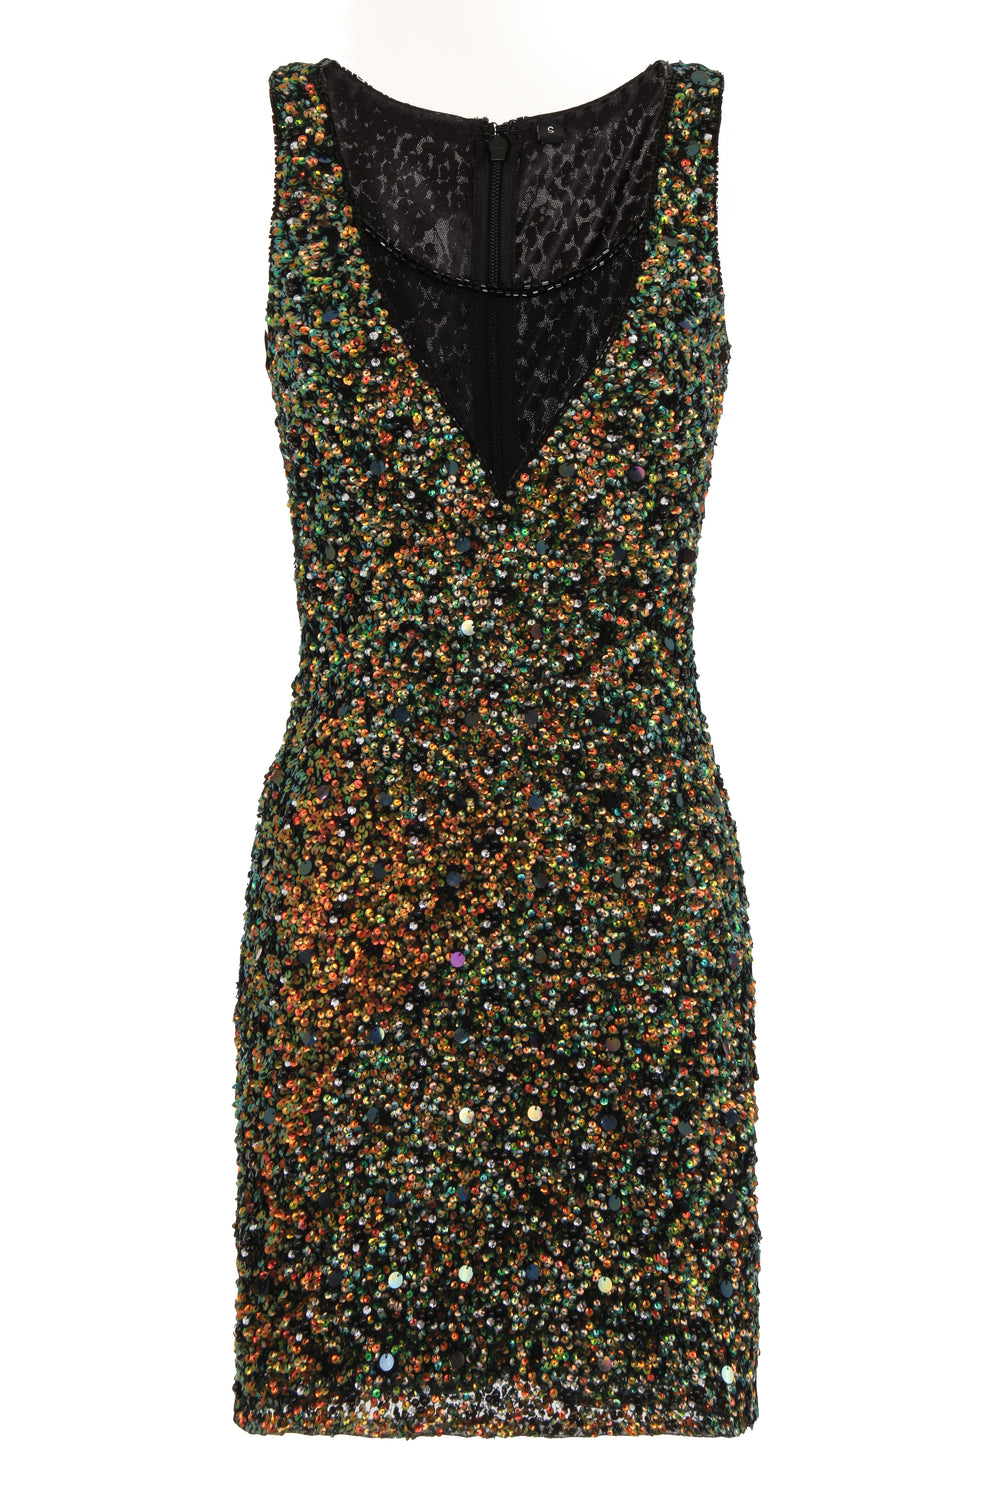 Anika Emerald Vip Handcrafted Full Beaded Sequin Fitted Dress